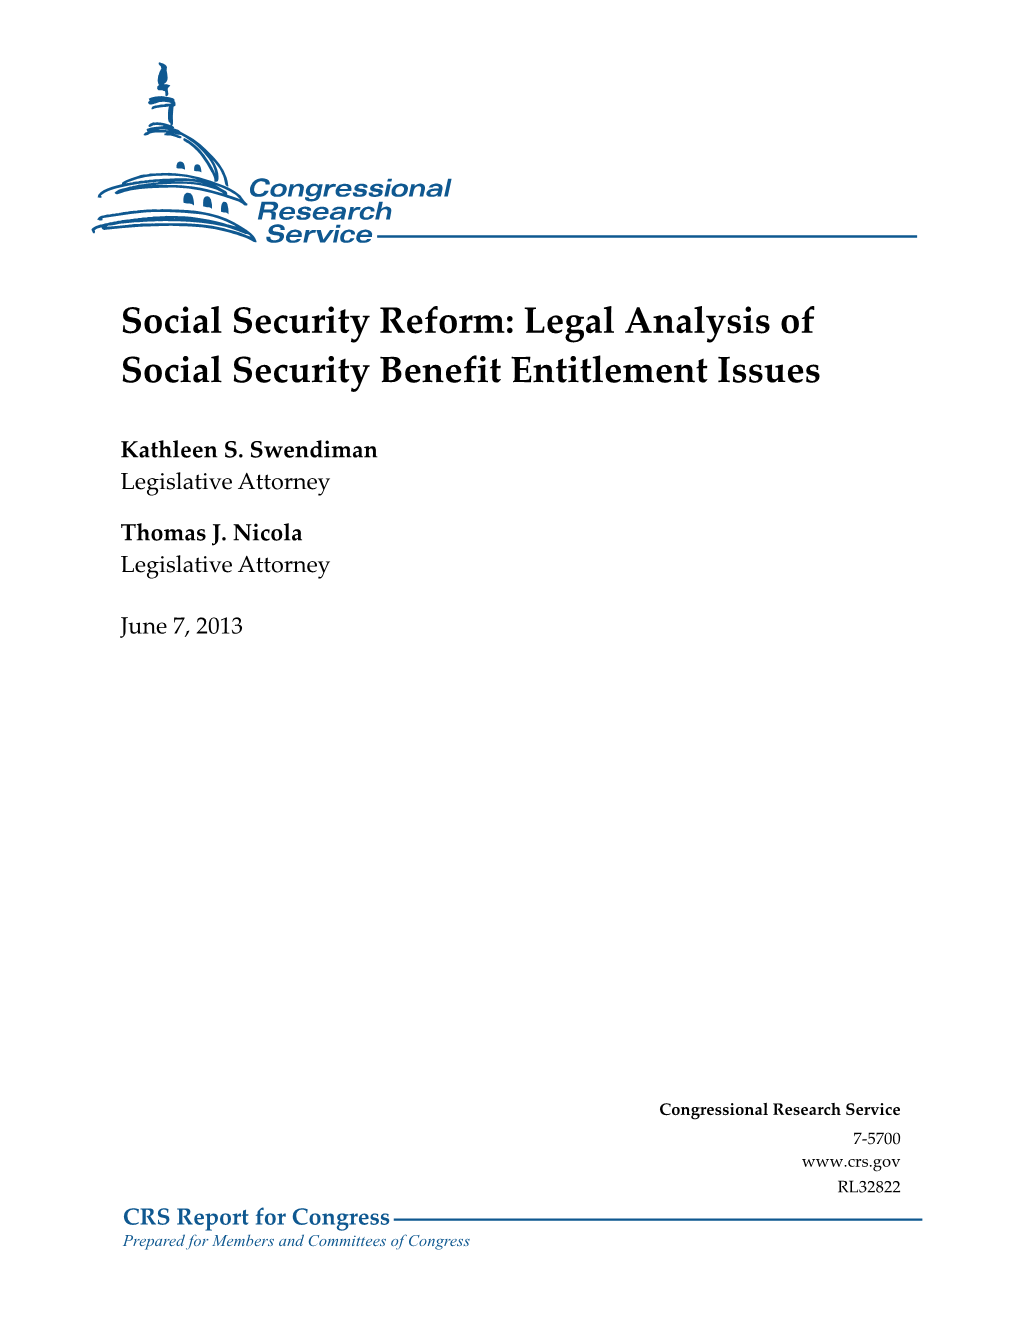 Social Security Reform: Legal Analysis of Social Security Benefit Entitlement Issues